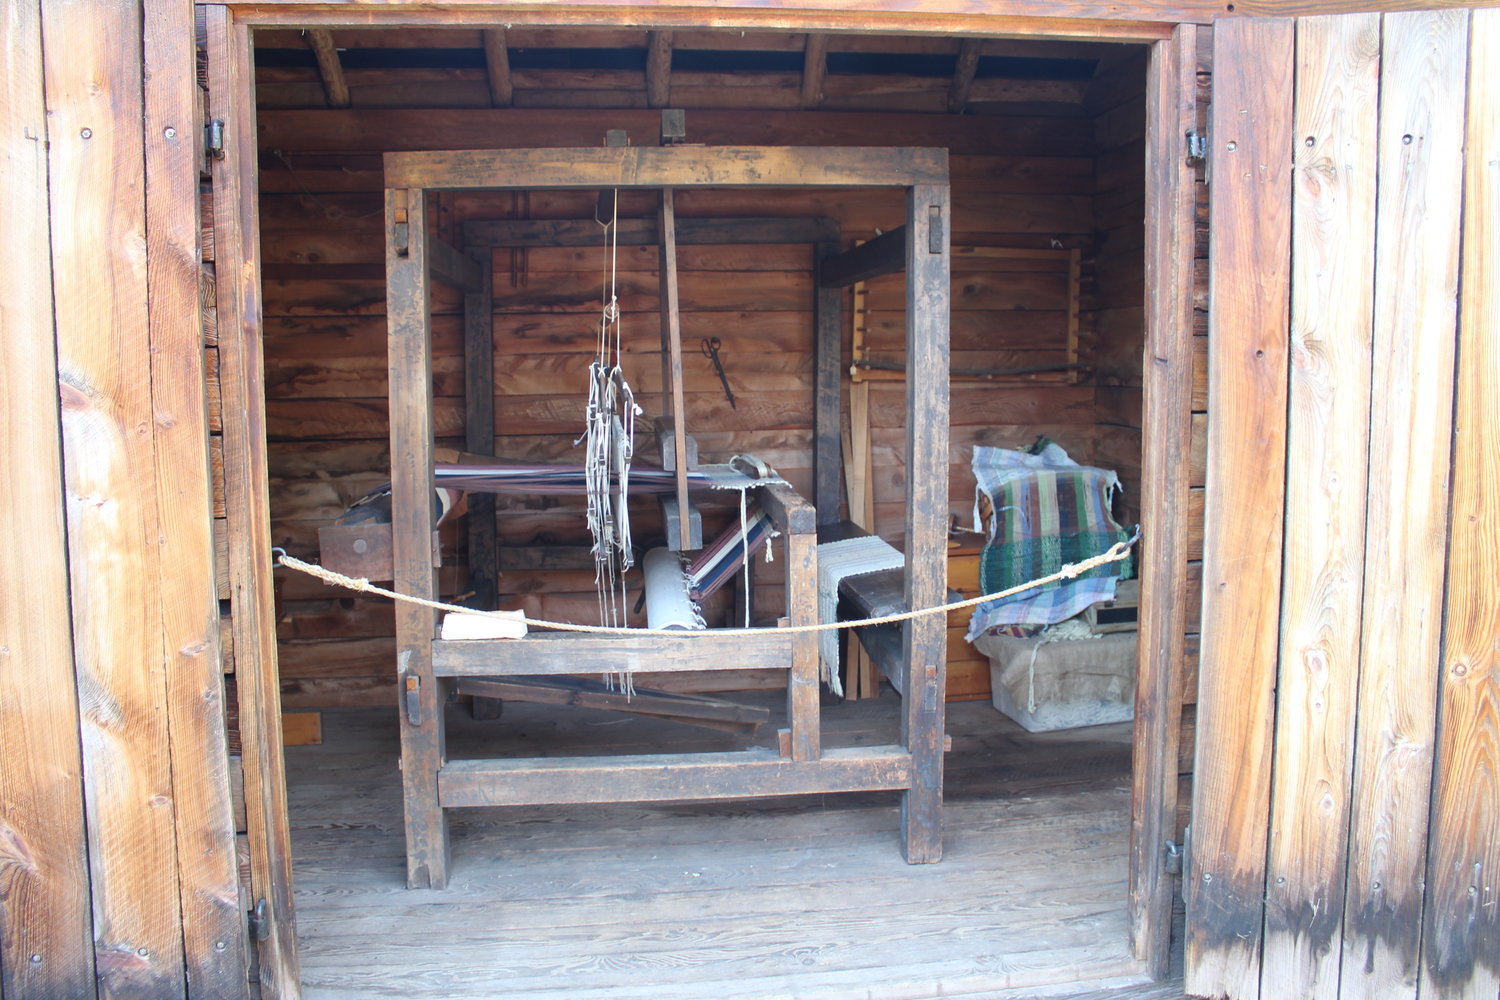 The weaver's workshop at Fort Delaware. Weaving is still a popular hobby, but machinery has sped up the process.